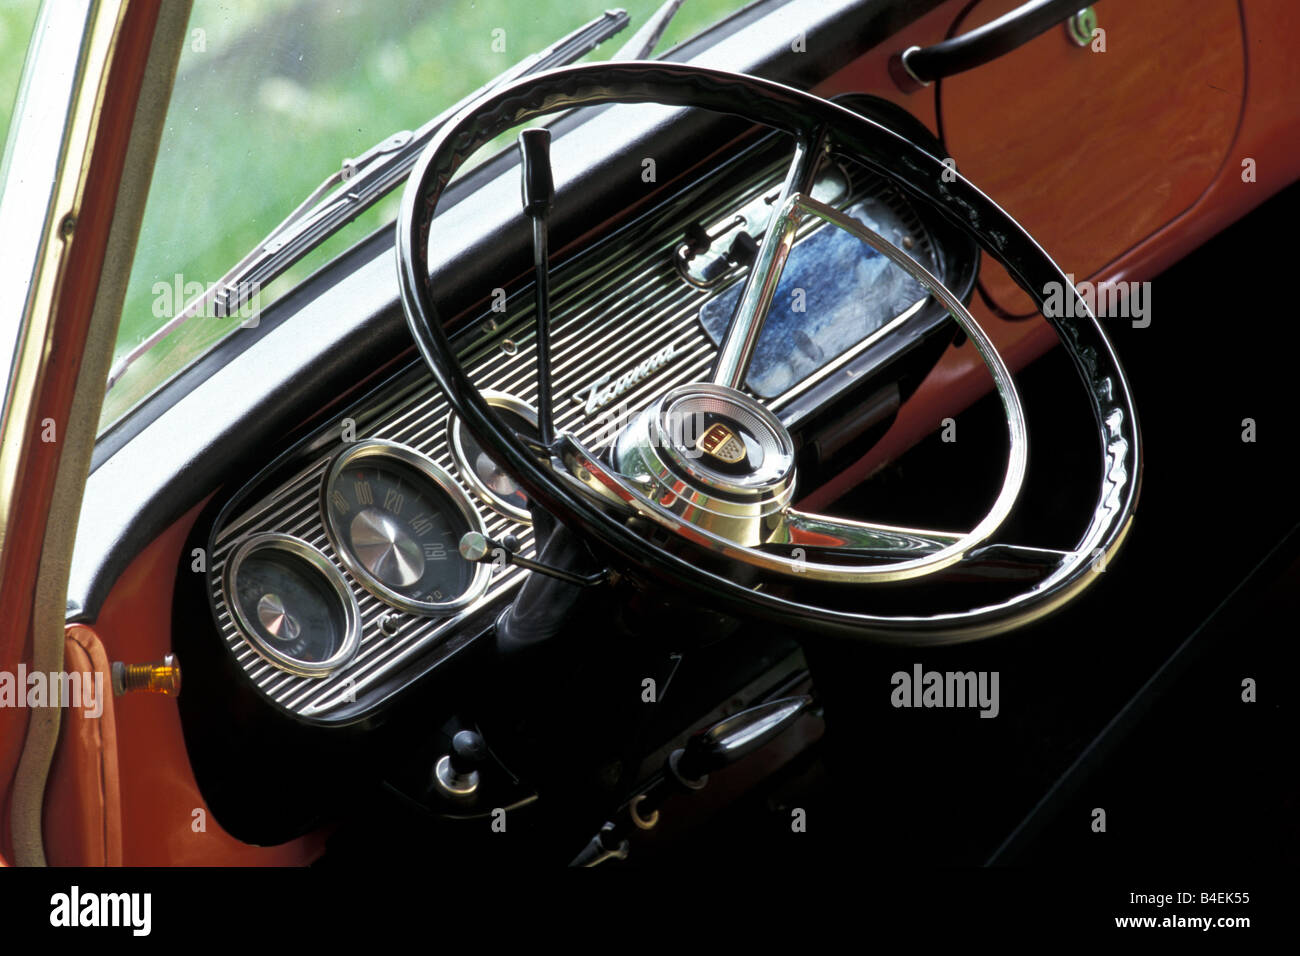 Car, Ford Taunus 17M P3, " bath tub ", red-white, model year 1960-1964,  vintage car, 1960s, sixties, detail, details, interior Stock Photo - Alamy